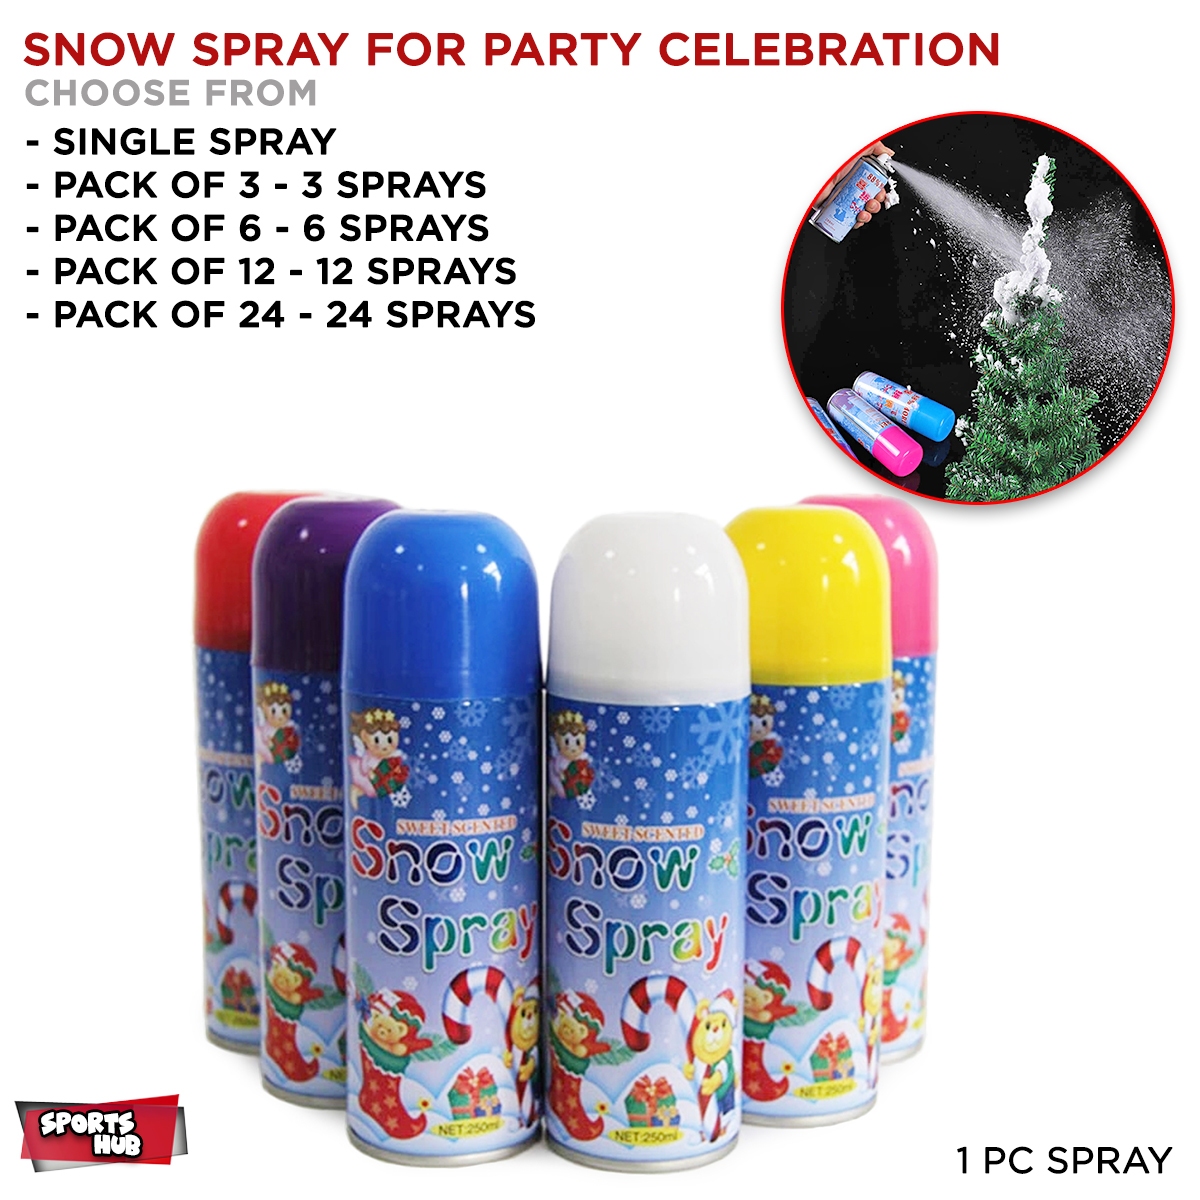 Snow Spray for birthday parties celebration, Artificial Snow spray can pack  of 3, 6, 12, 24 for party, bridal shower, weddings, anniversary, party  popper confetti snow decoration Supplies Set